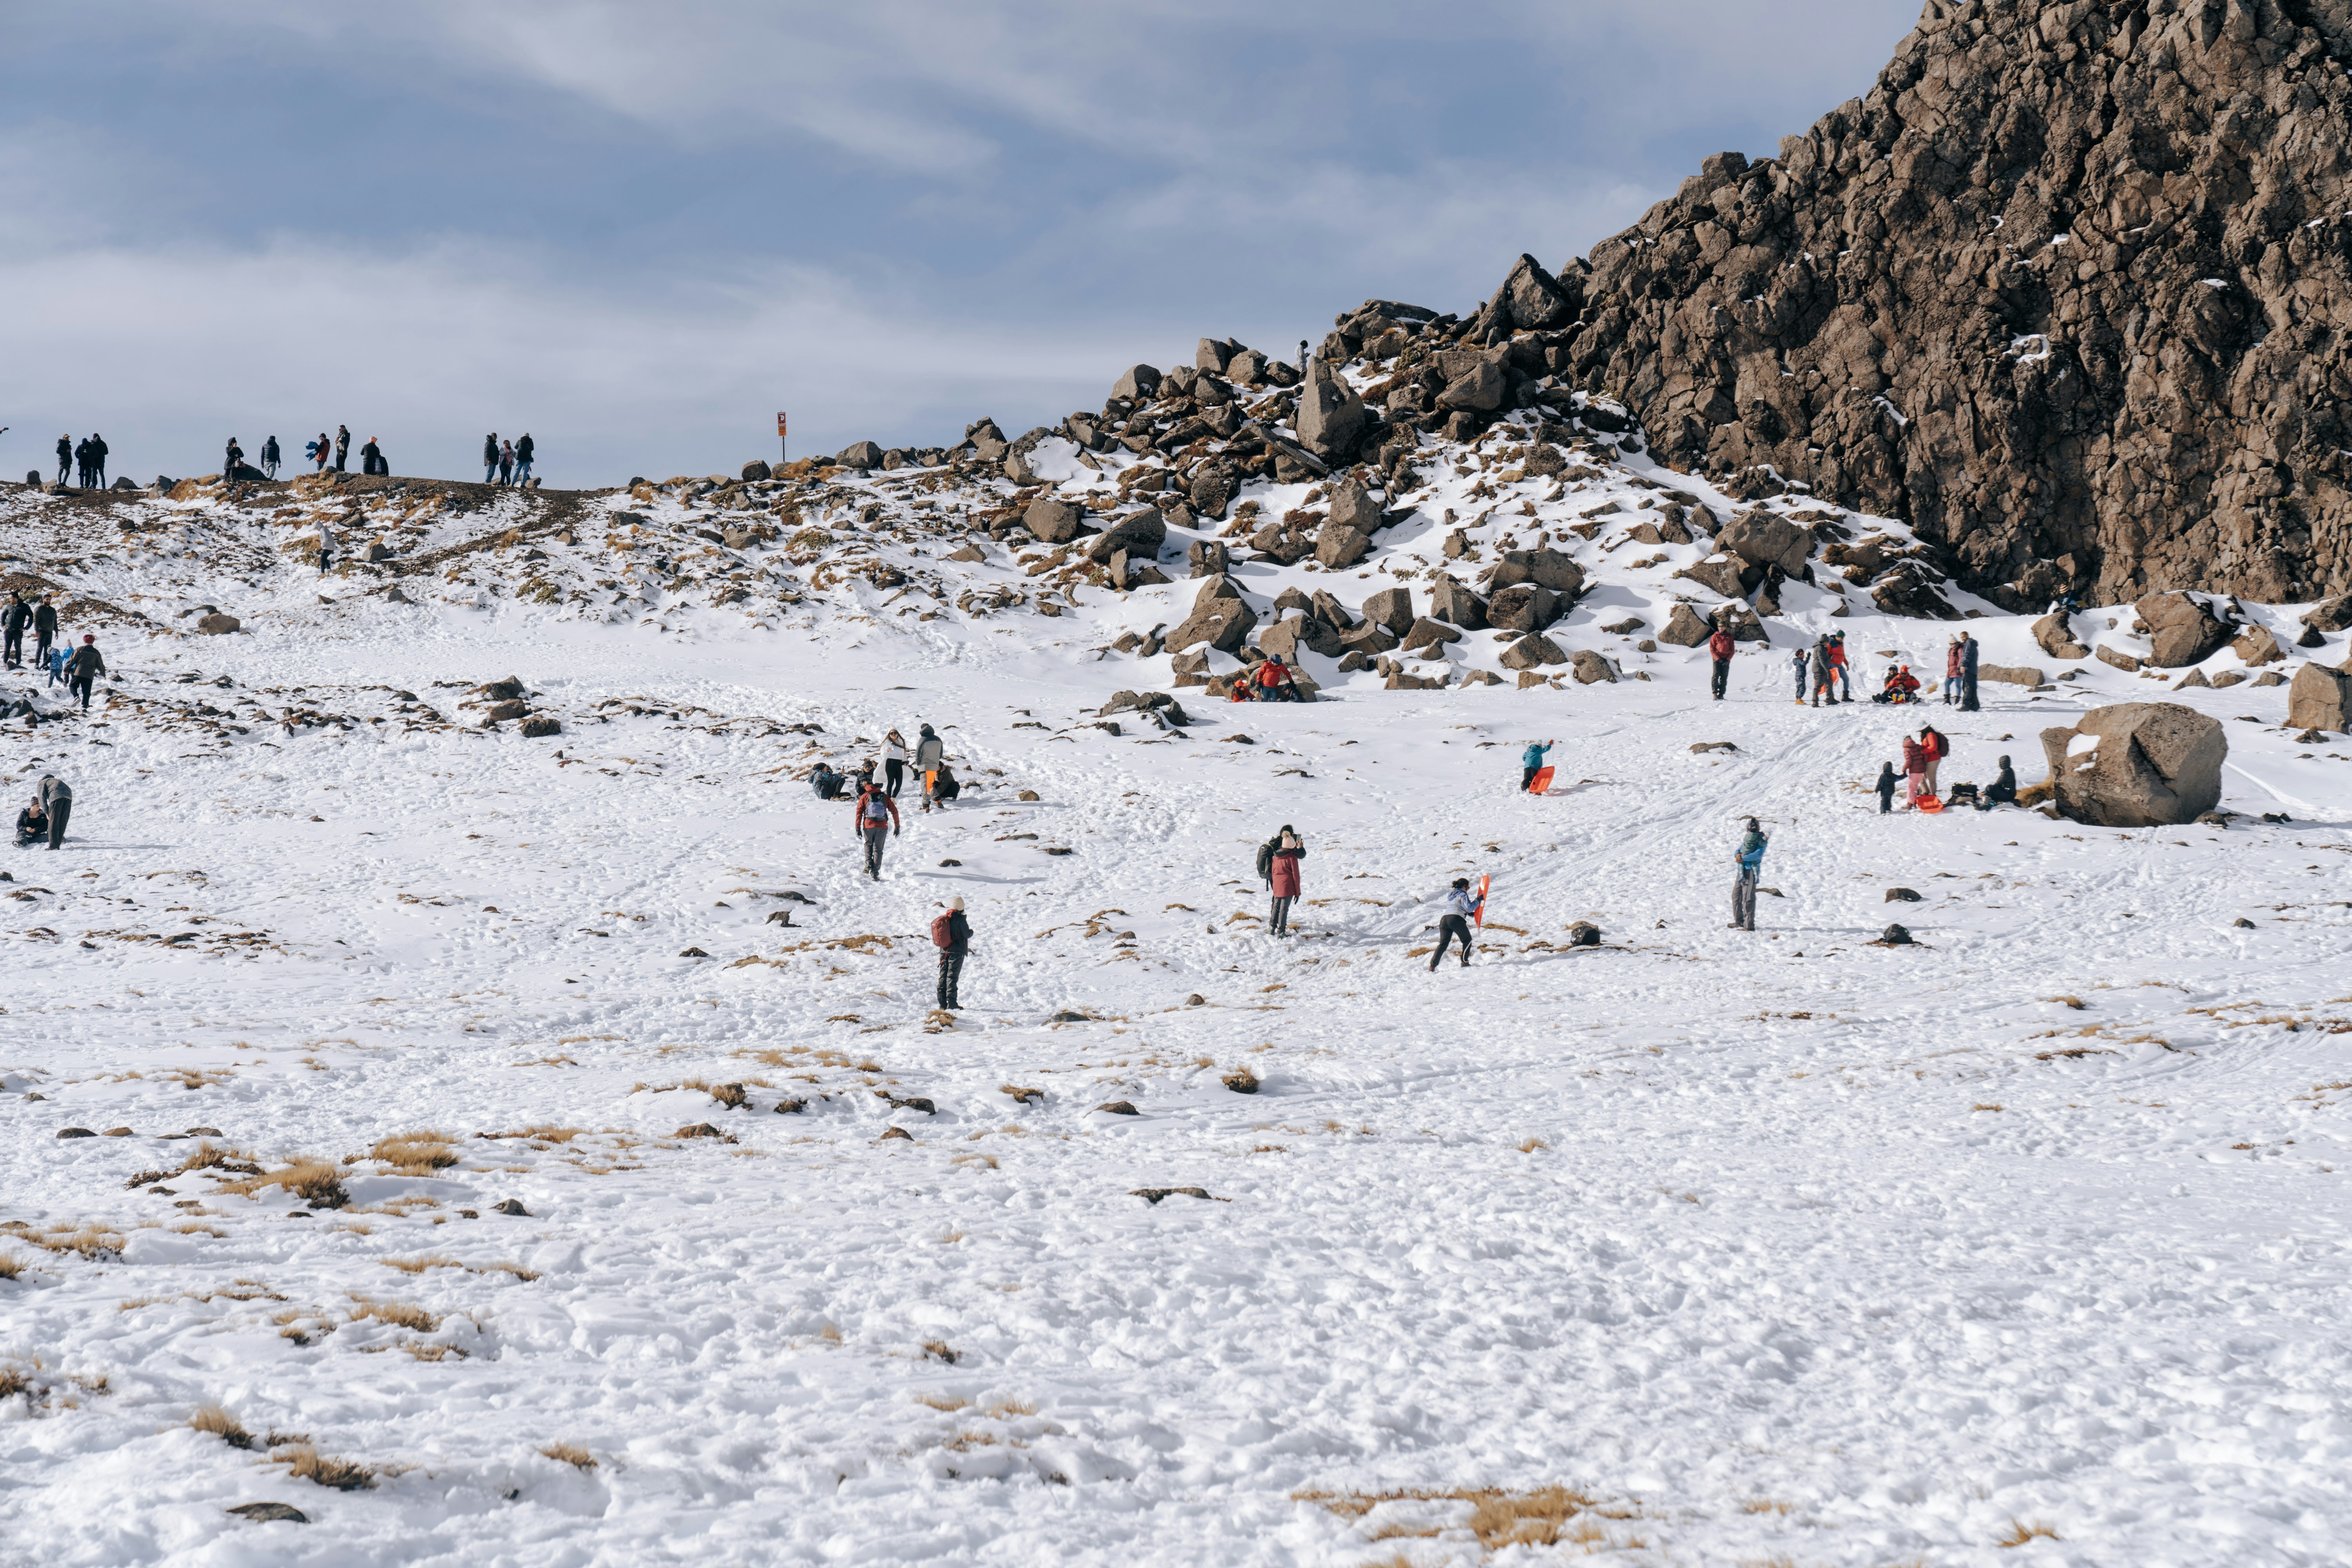 people on snow covered field during daytime